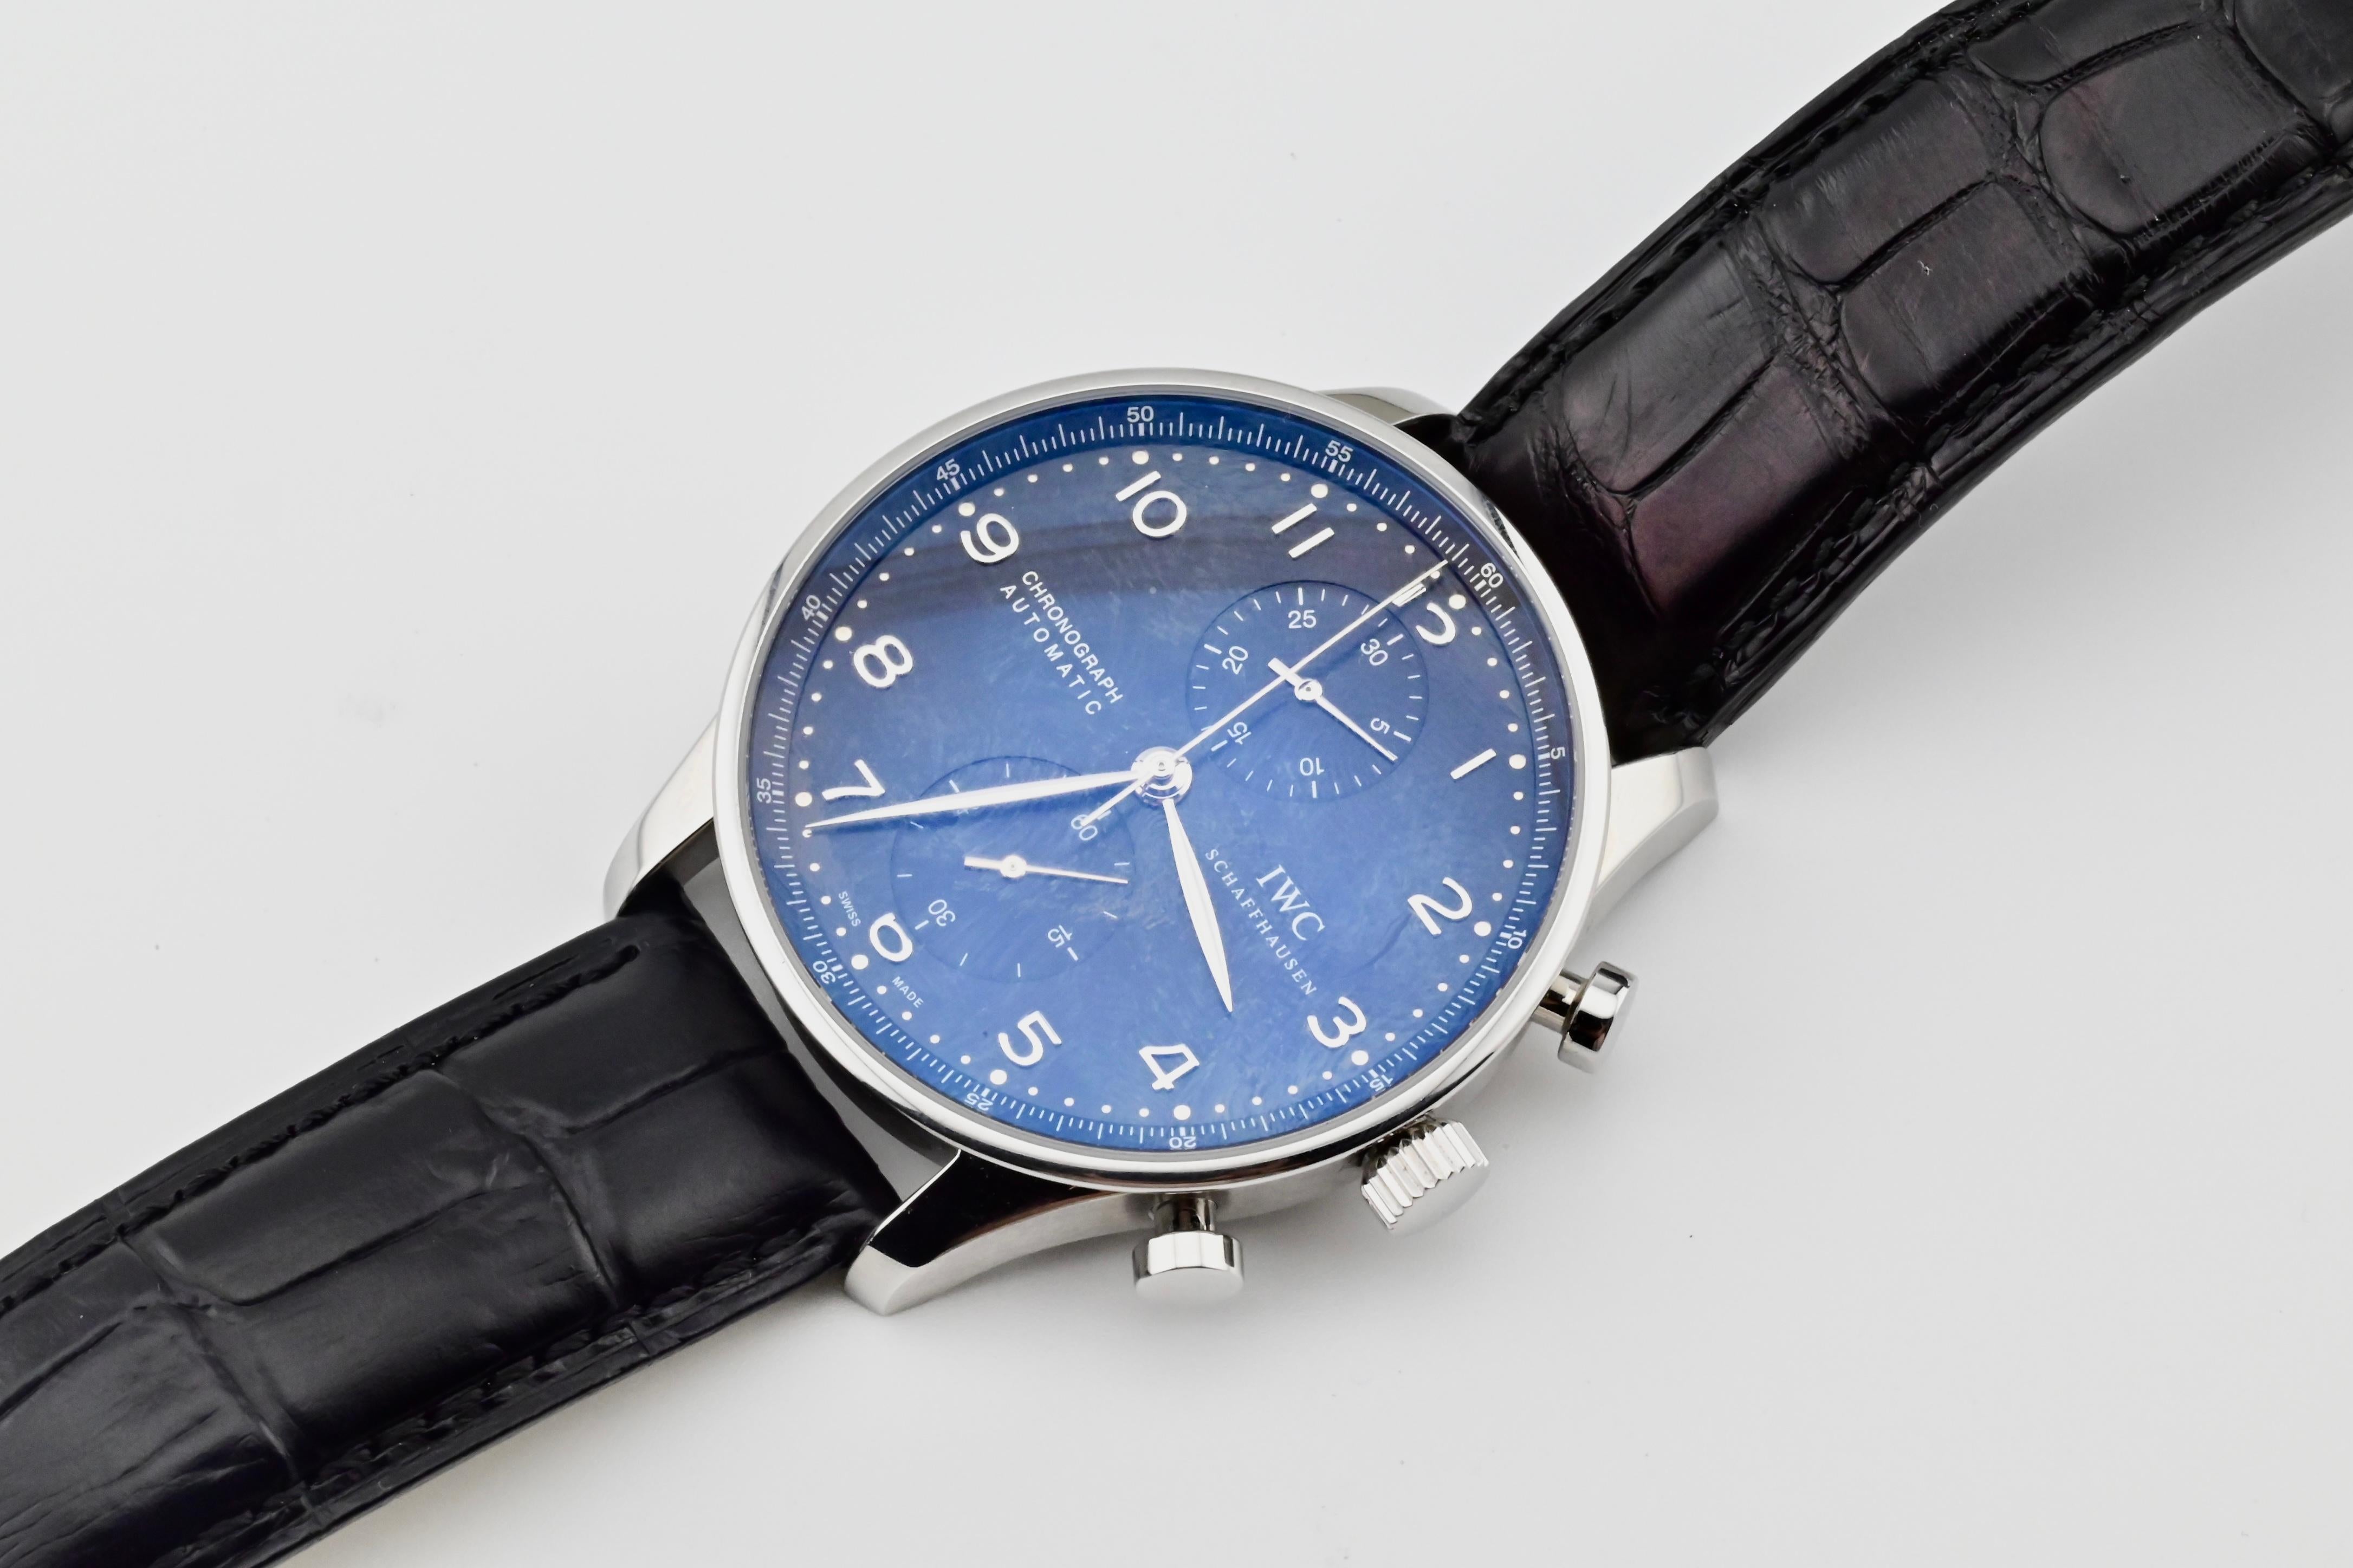 This is an IWC Schaffhausen portugieser chronograph watch, IW371609, and it’s truly a timeless piece. This watch uses an automatic movement, and has a sapphire crystal watch dial. It weighs 88 grams, and is 11 inches full length (including the